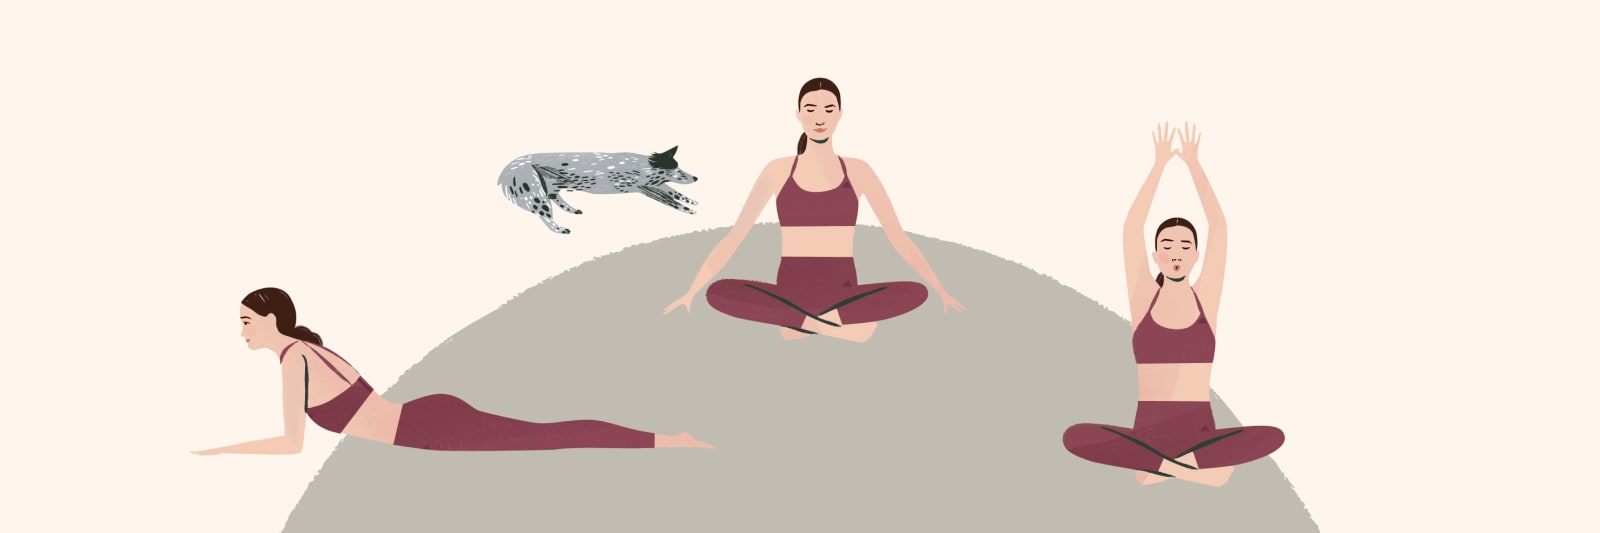 28 Different Types Of Yoga And Their Benefits